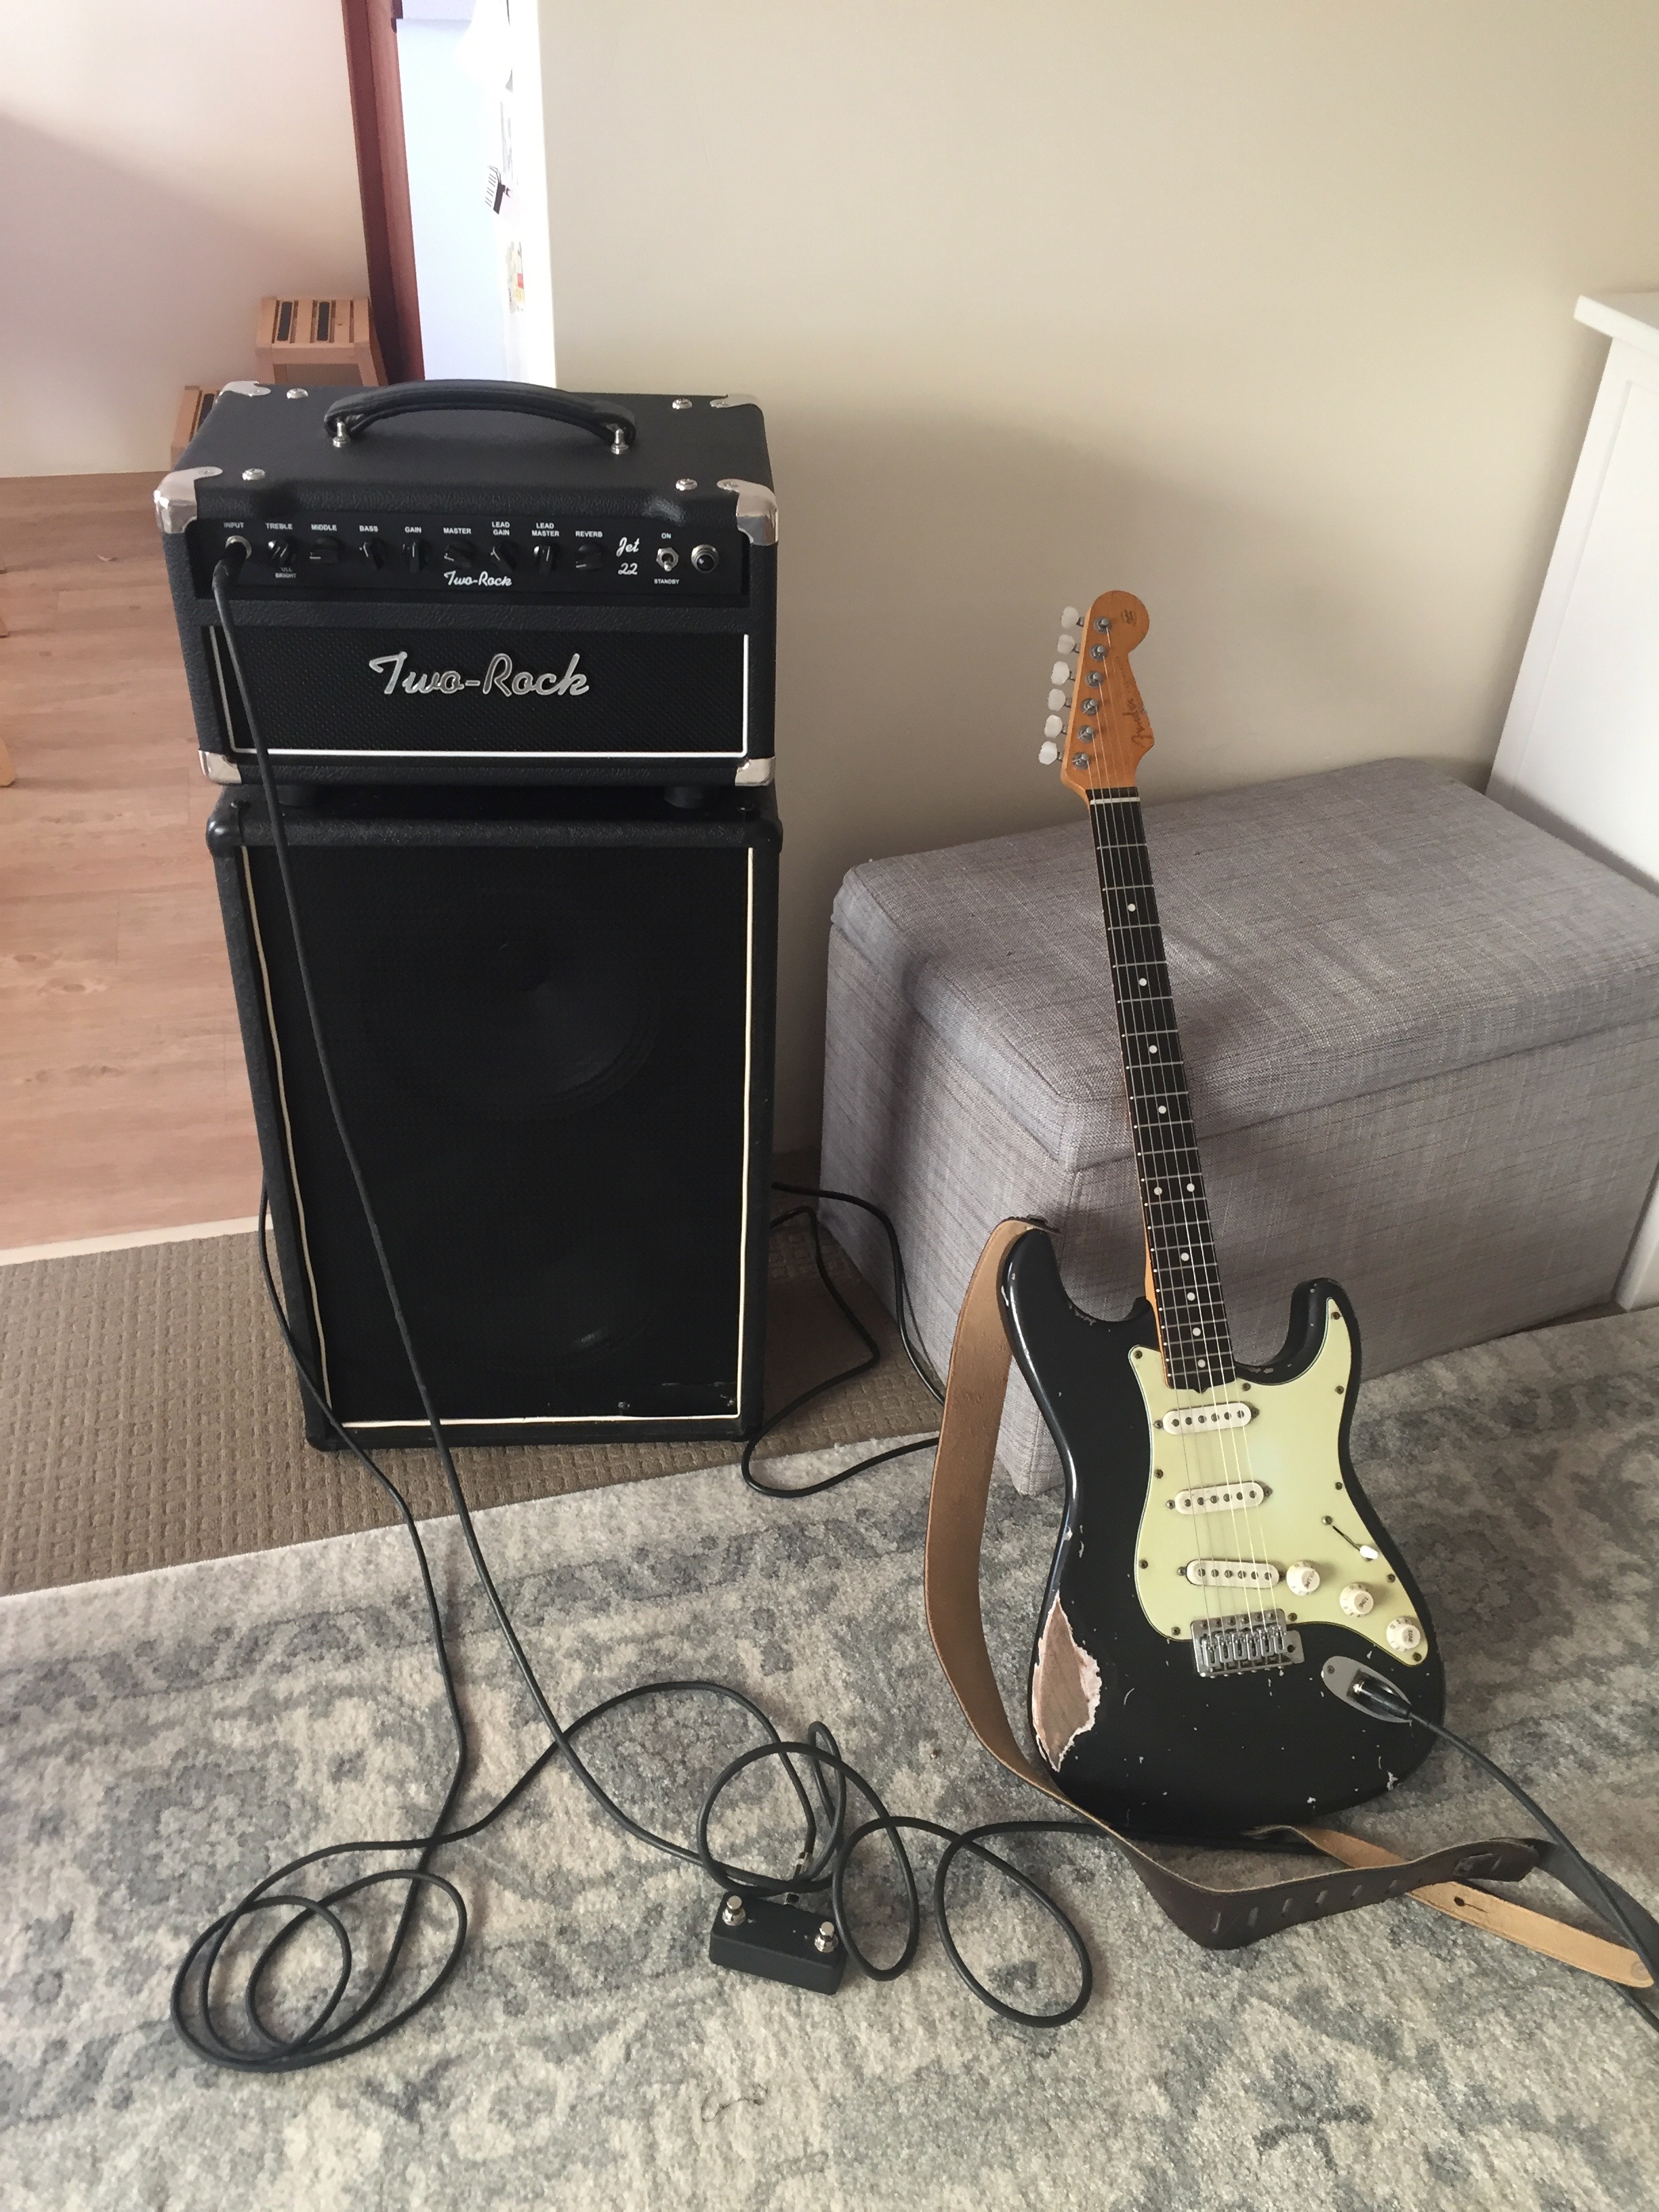 Thoughts on the Dumble tone – an honest review of the Two-Rock Jet and comparison with the Victory V40